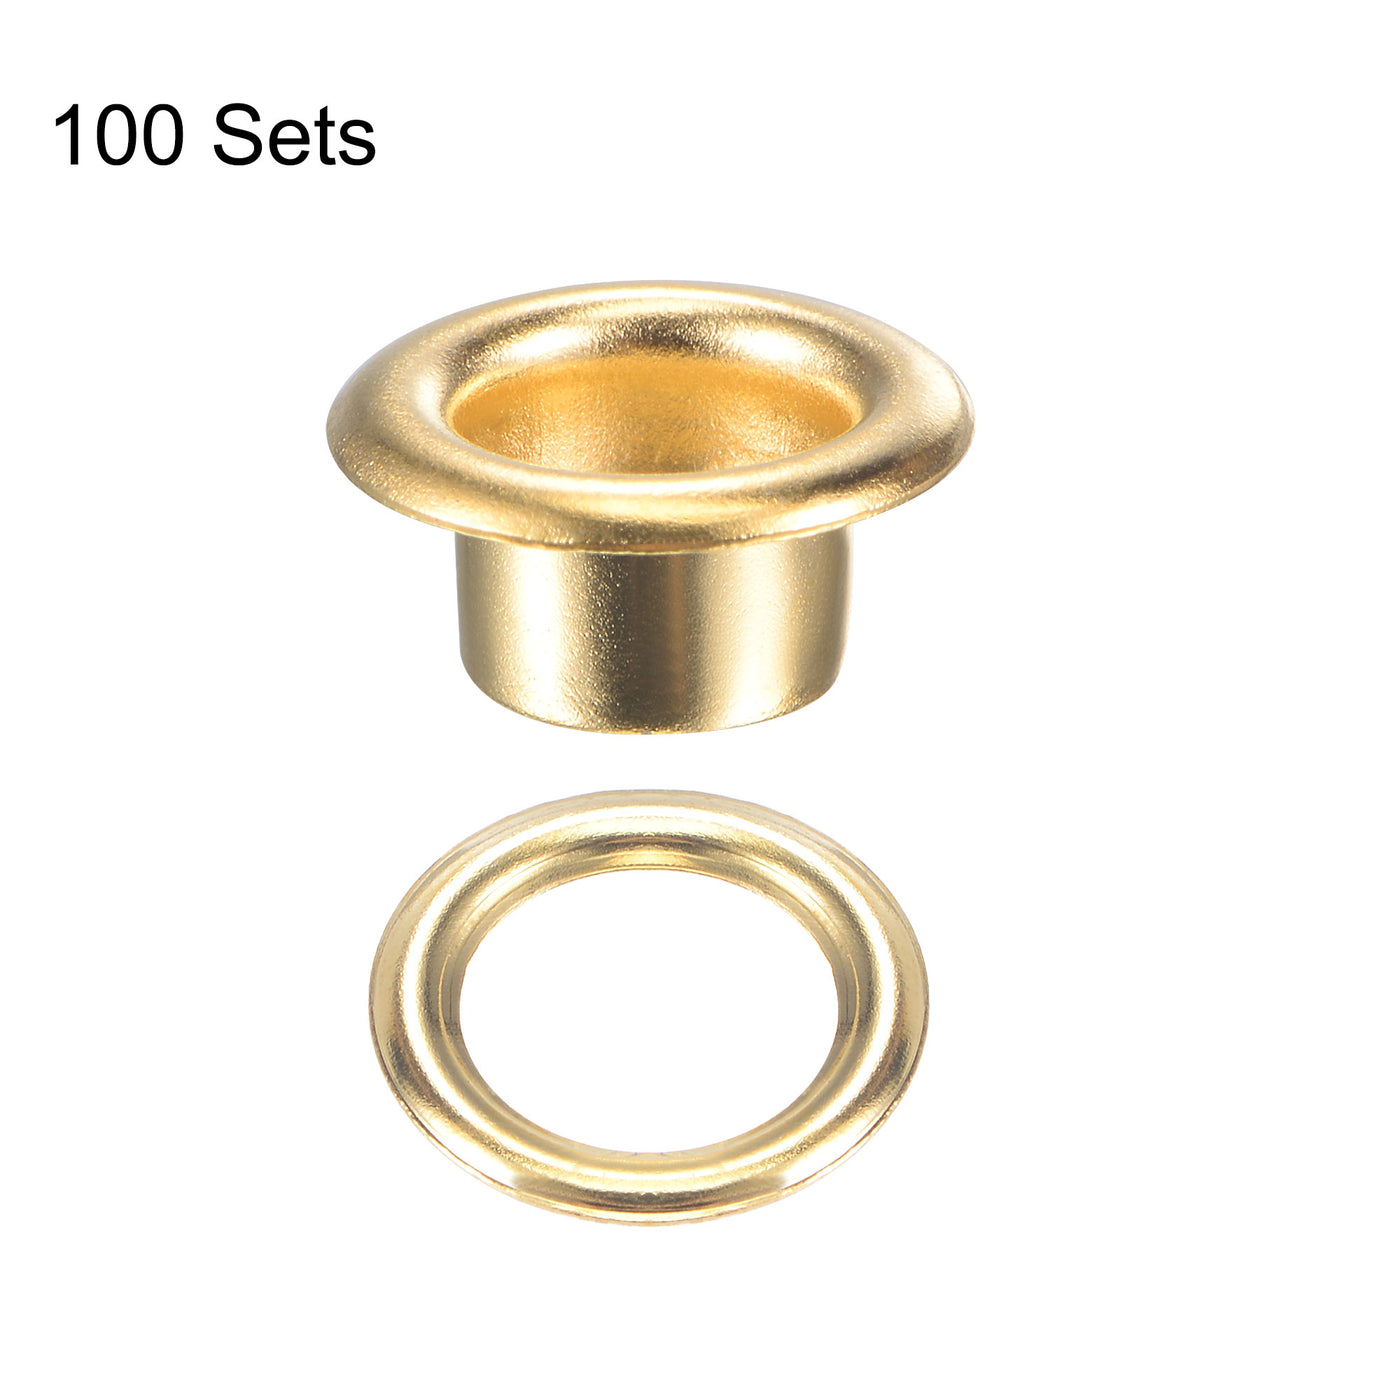 uxcell Uxcell Eyelet with Washer 10.5x6x5mm Copper Grommet Chrome Plated Brass Tone 100 Set